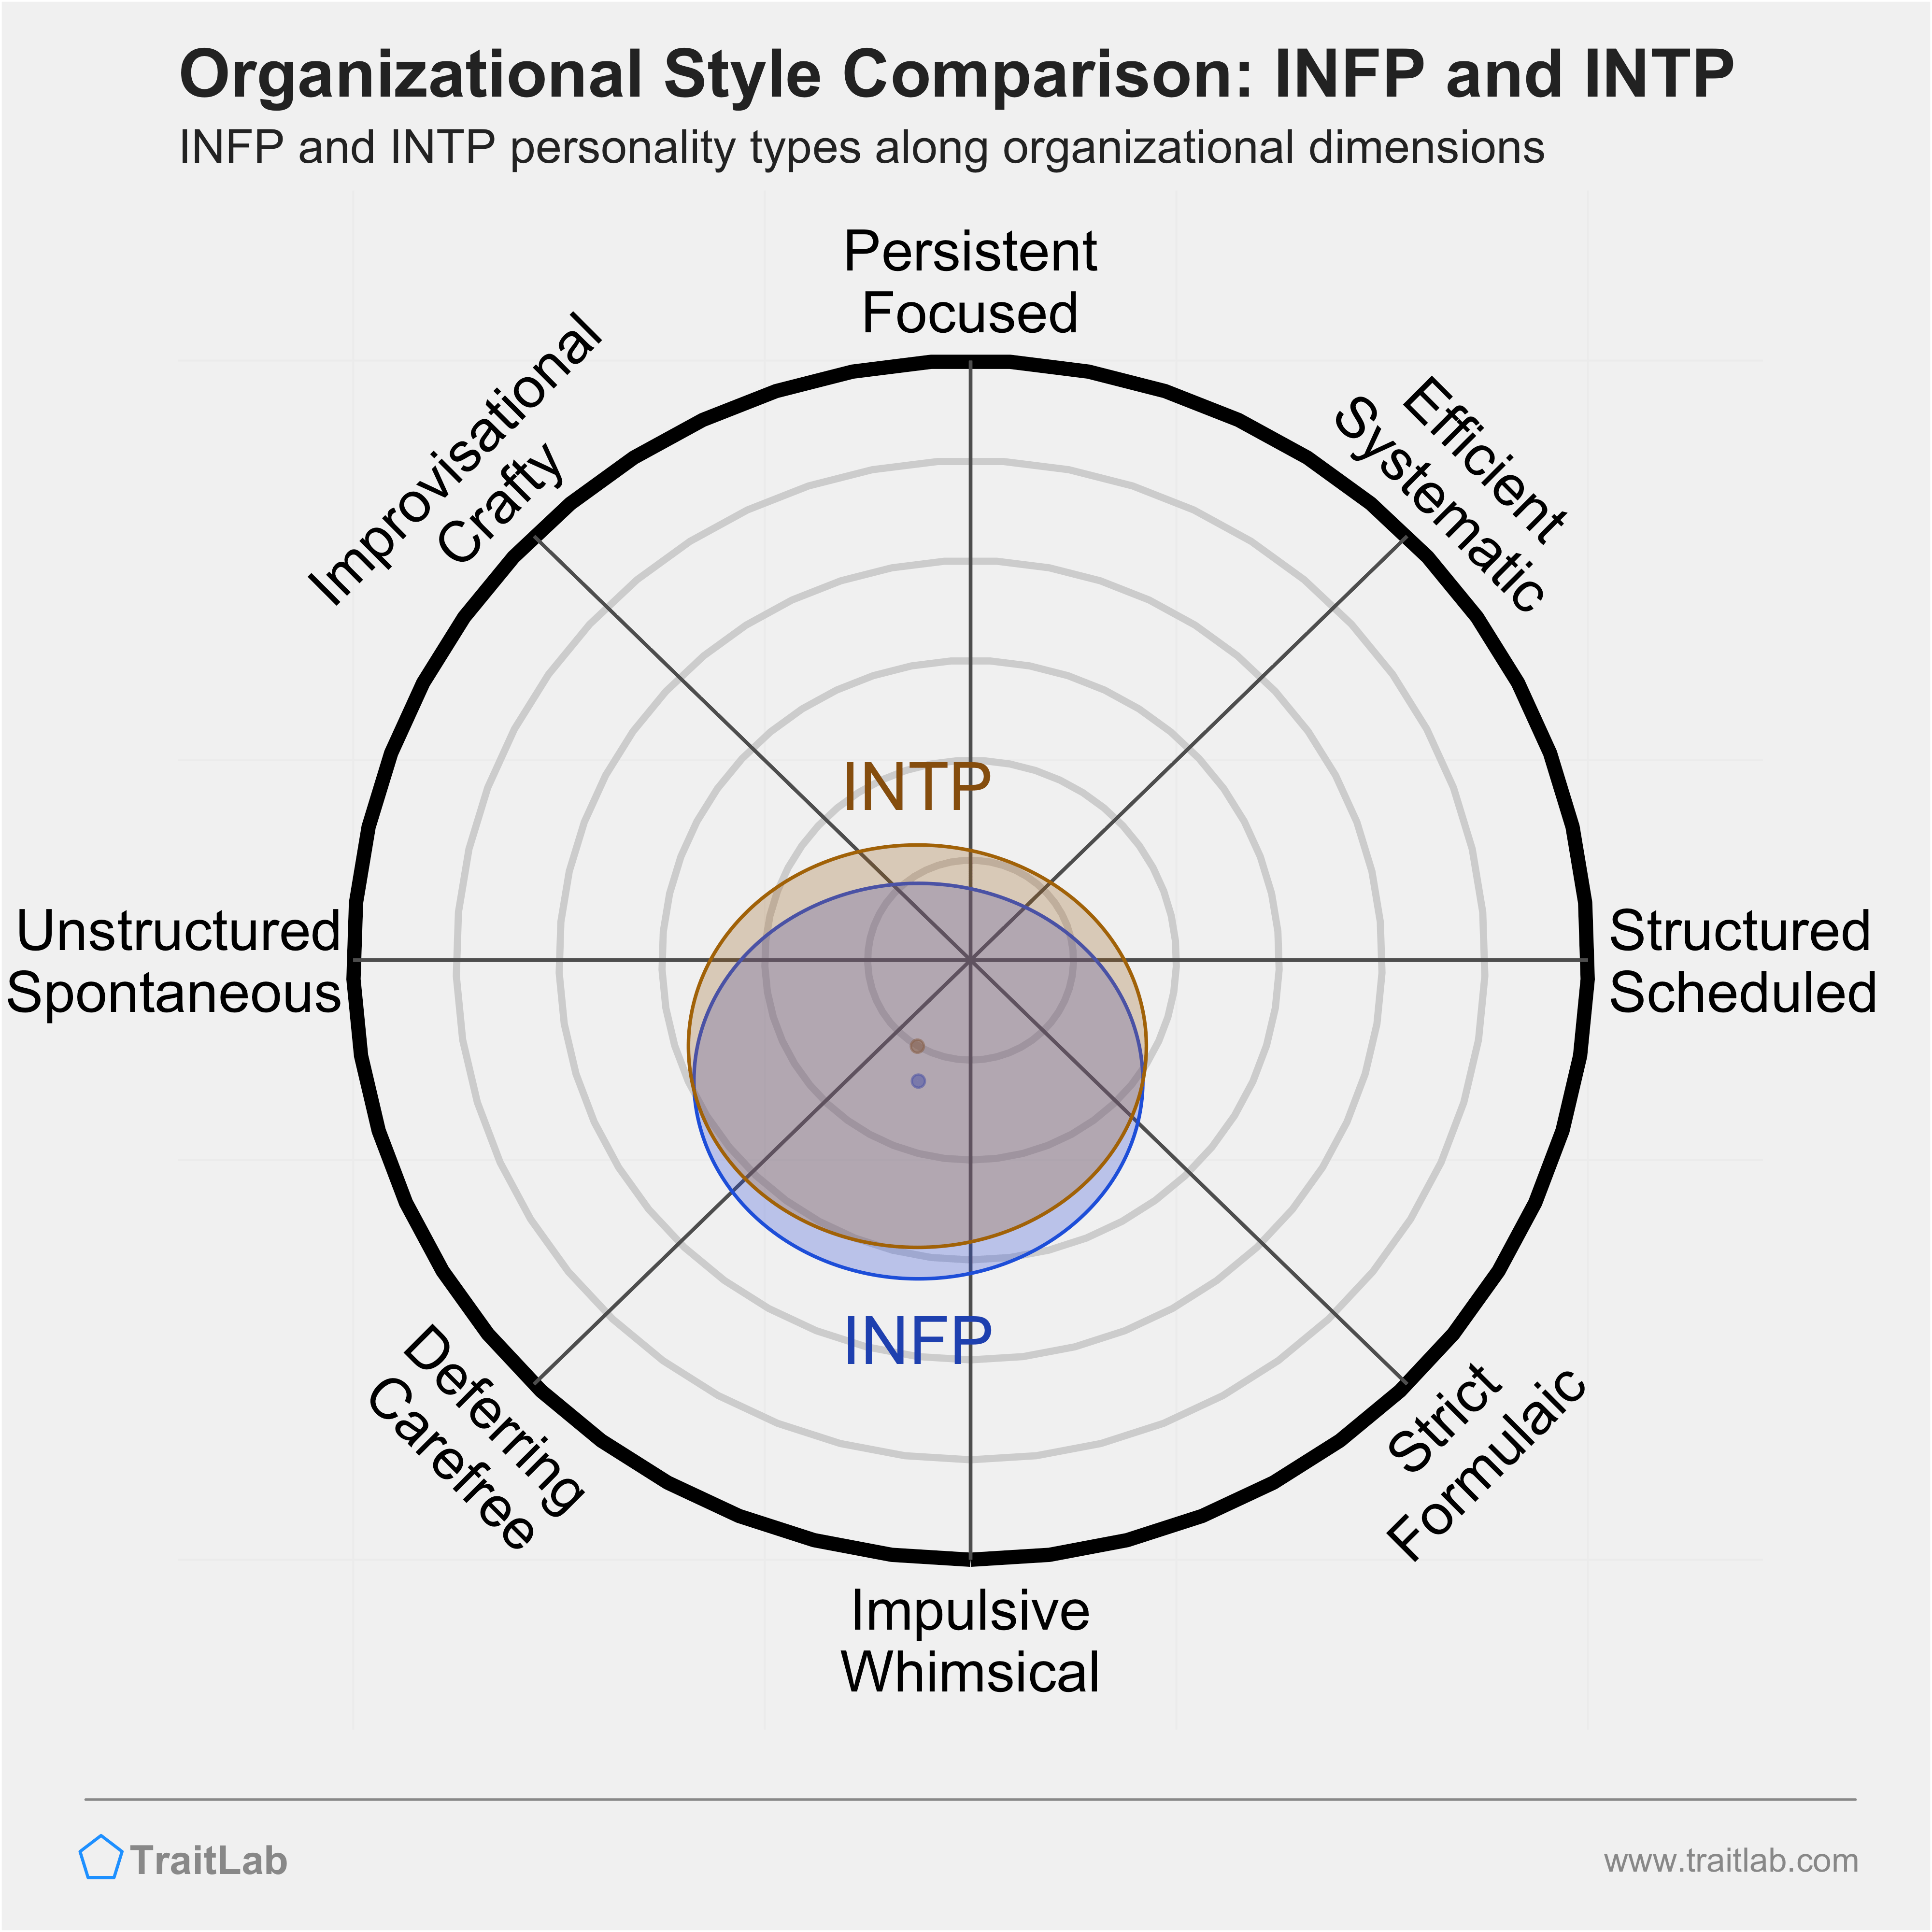 INFP and INTP comparison across organizational dimensions